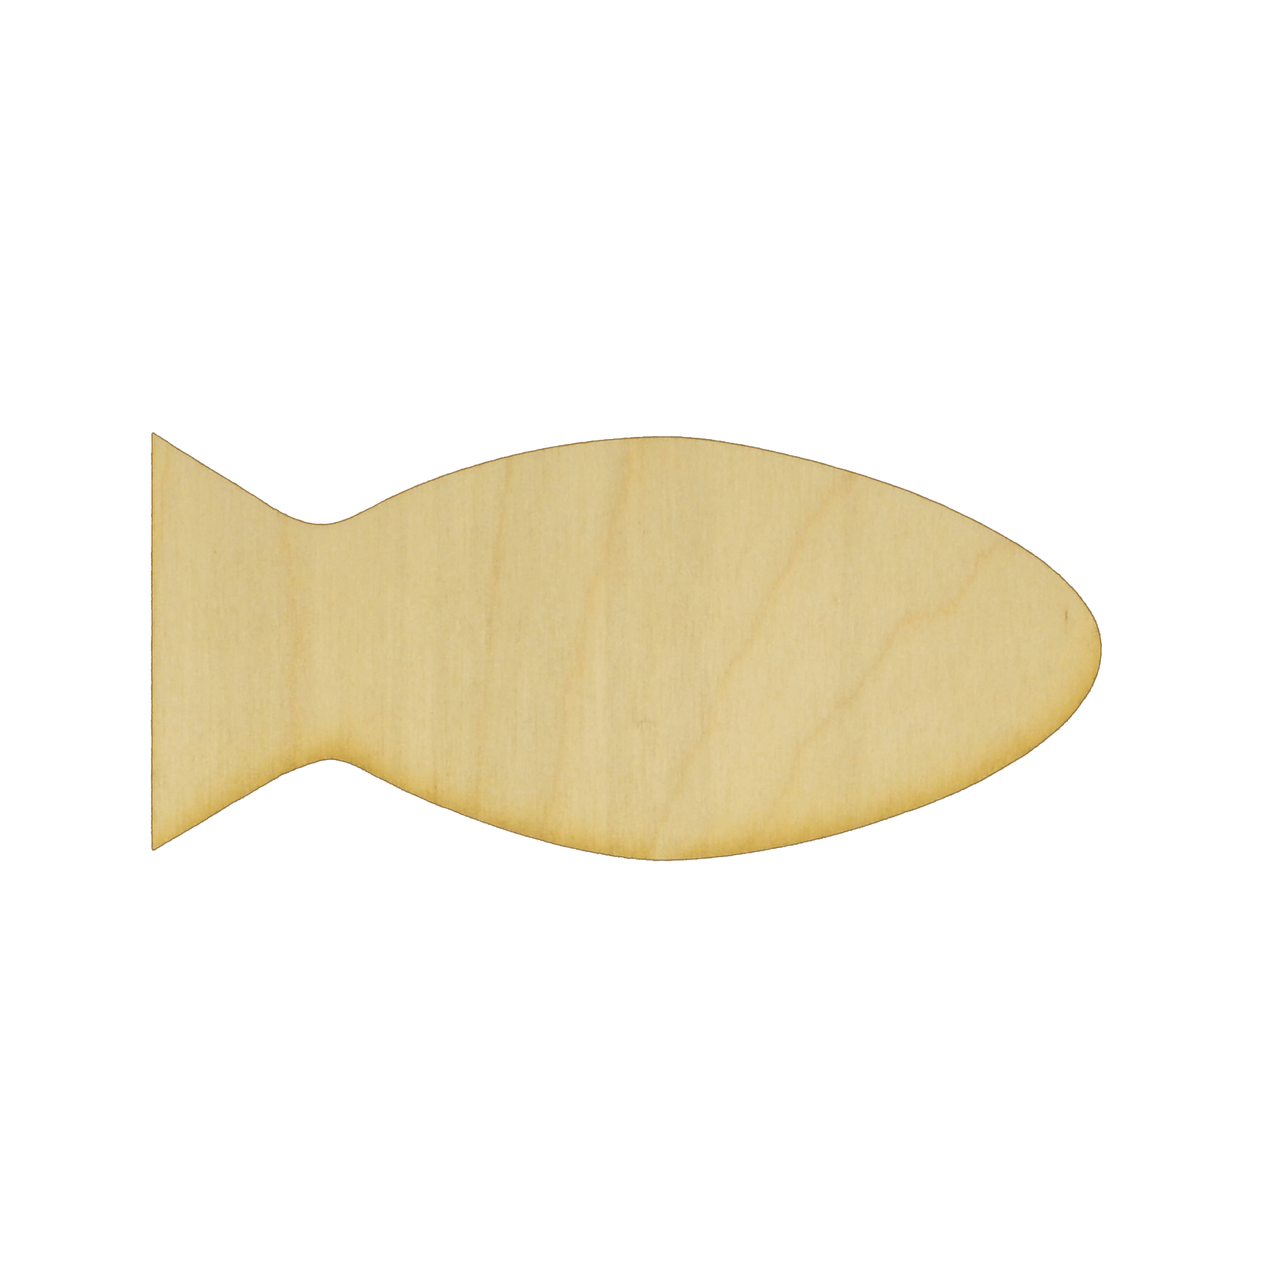 Unfinished Wooden Fish Cutout For Crafts